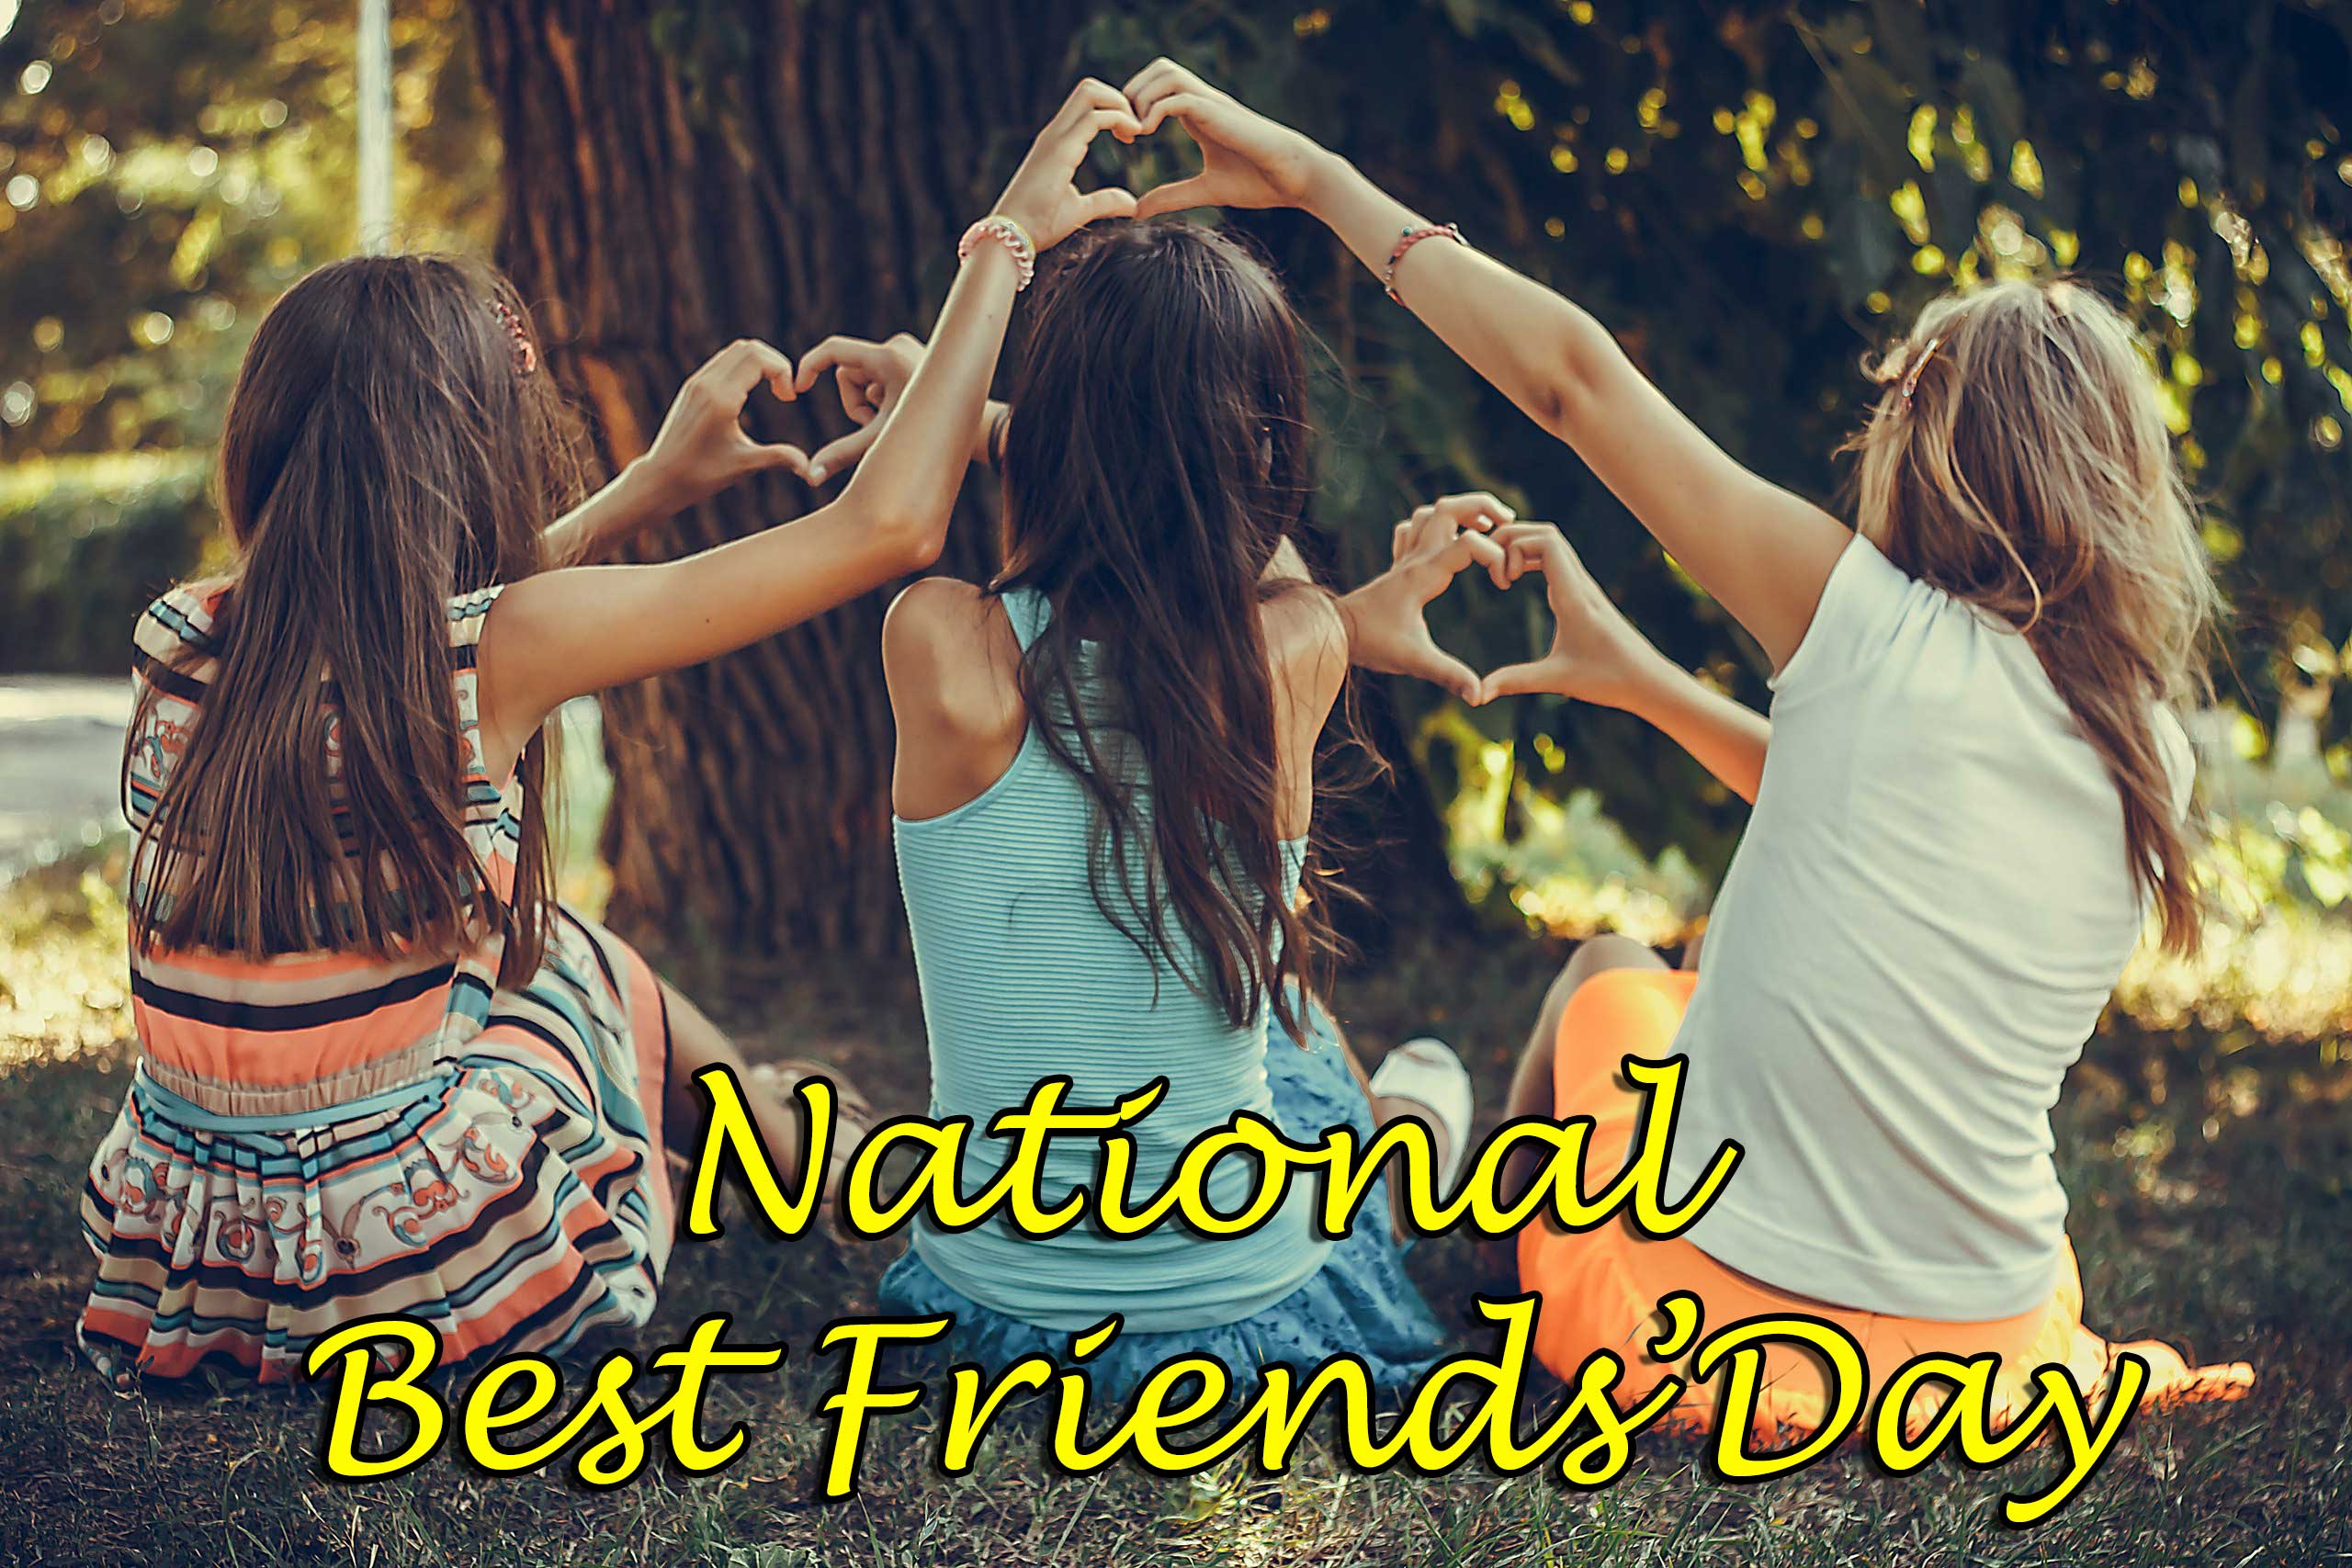 National Best friends’ Day Bliss Products and Services Commercial